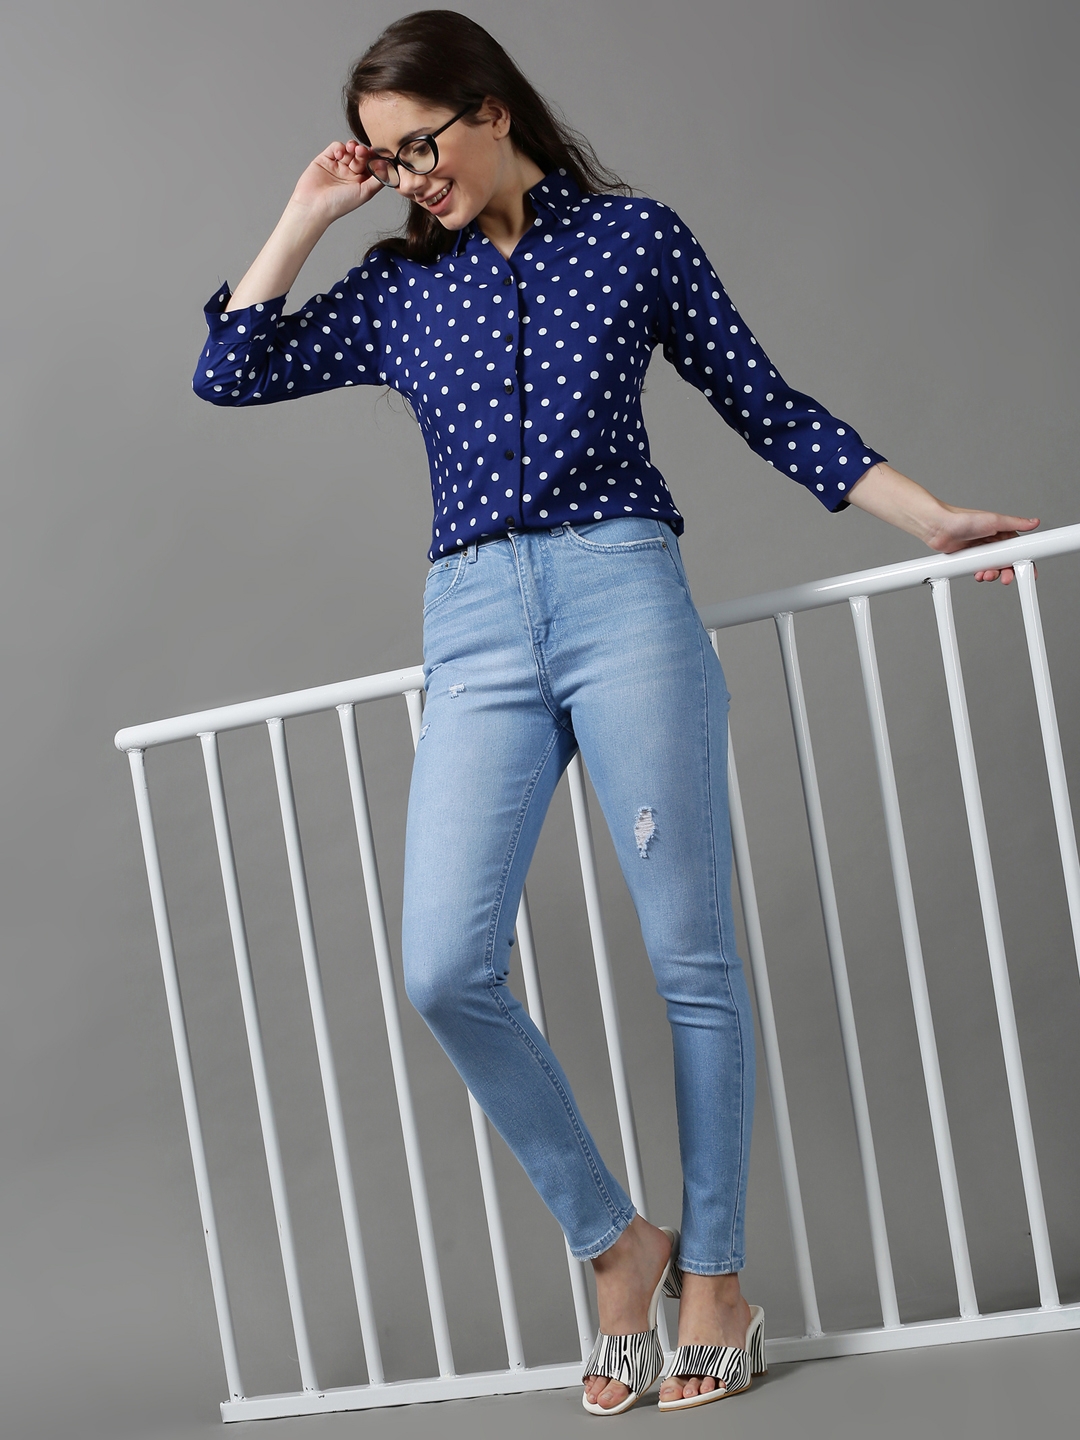 Women's Blue Cotton Printed Casual Shirts